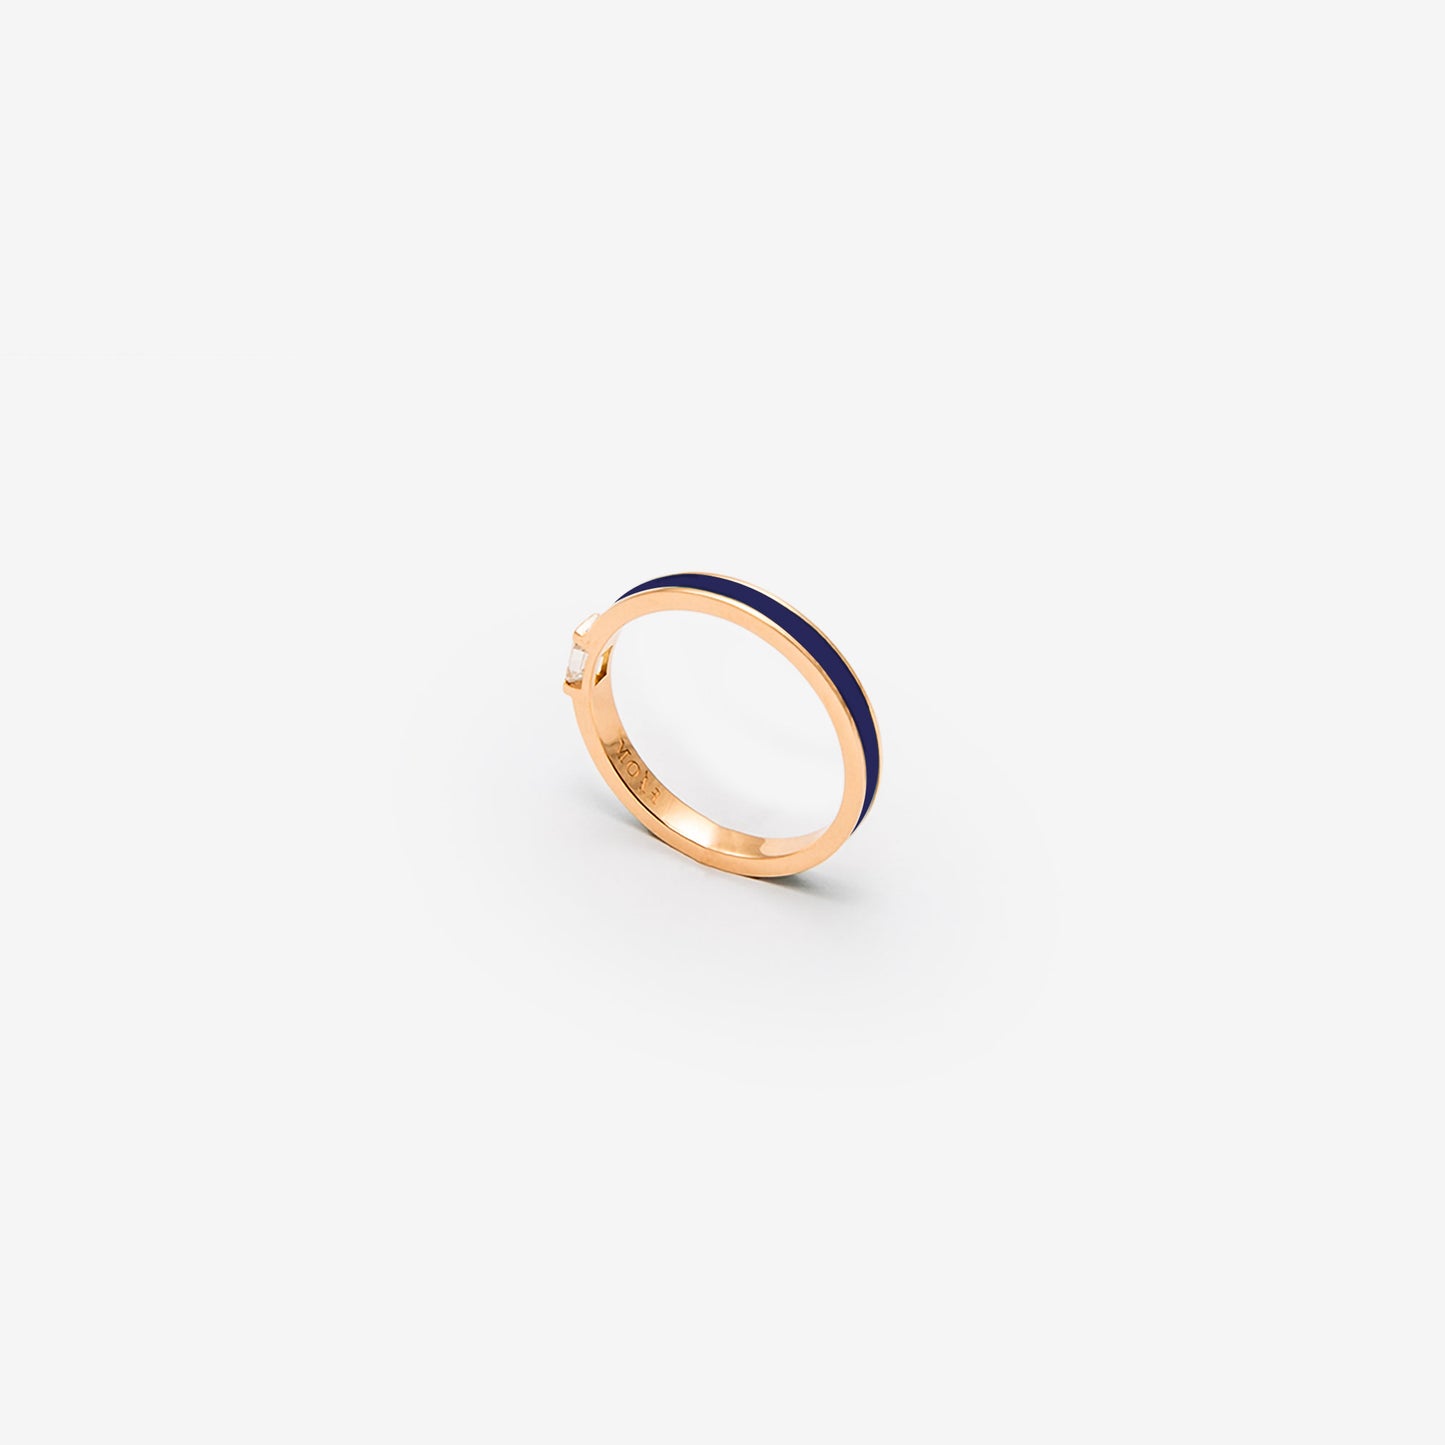 Rose gold band with dark blue enamel and a diamond